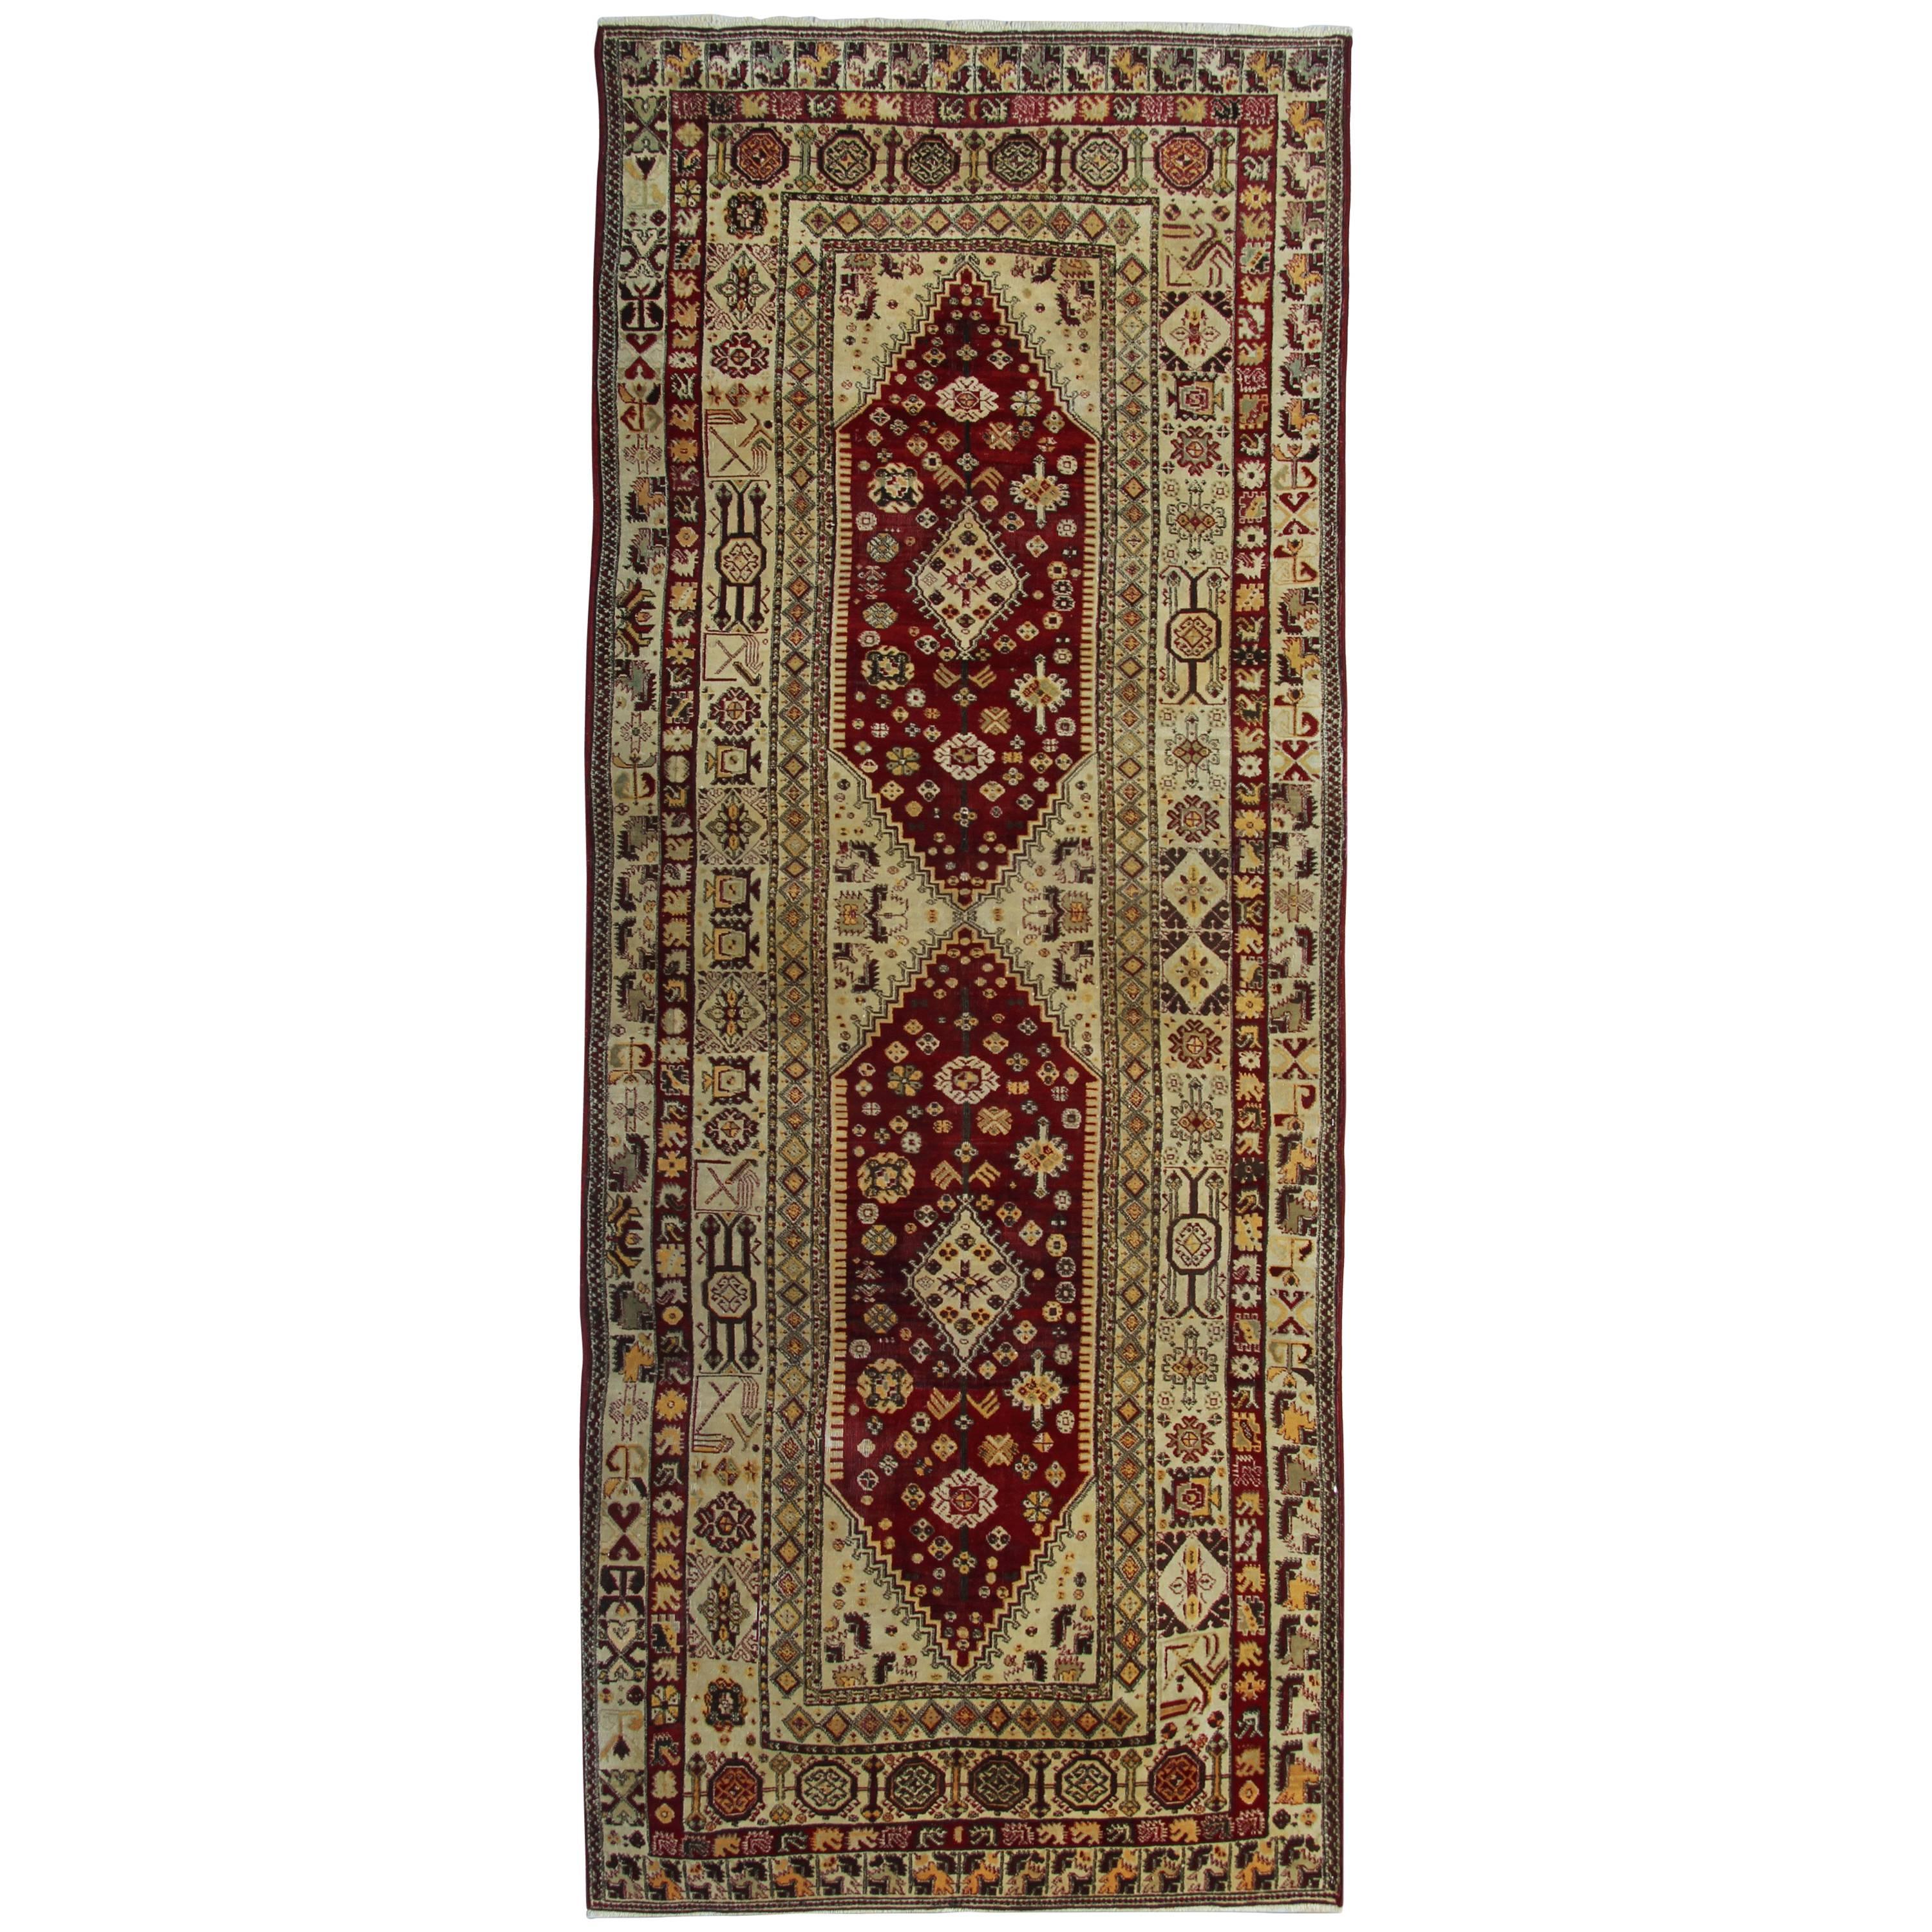 Antique Rug Oriental Rugs, Agra Handmade Carpet Runners from India